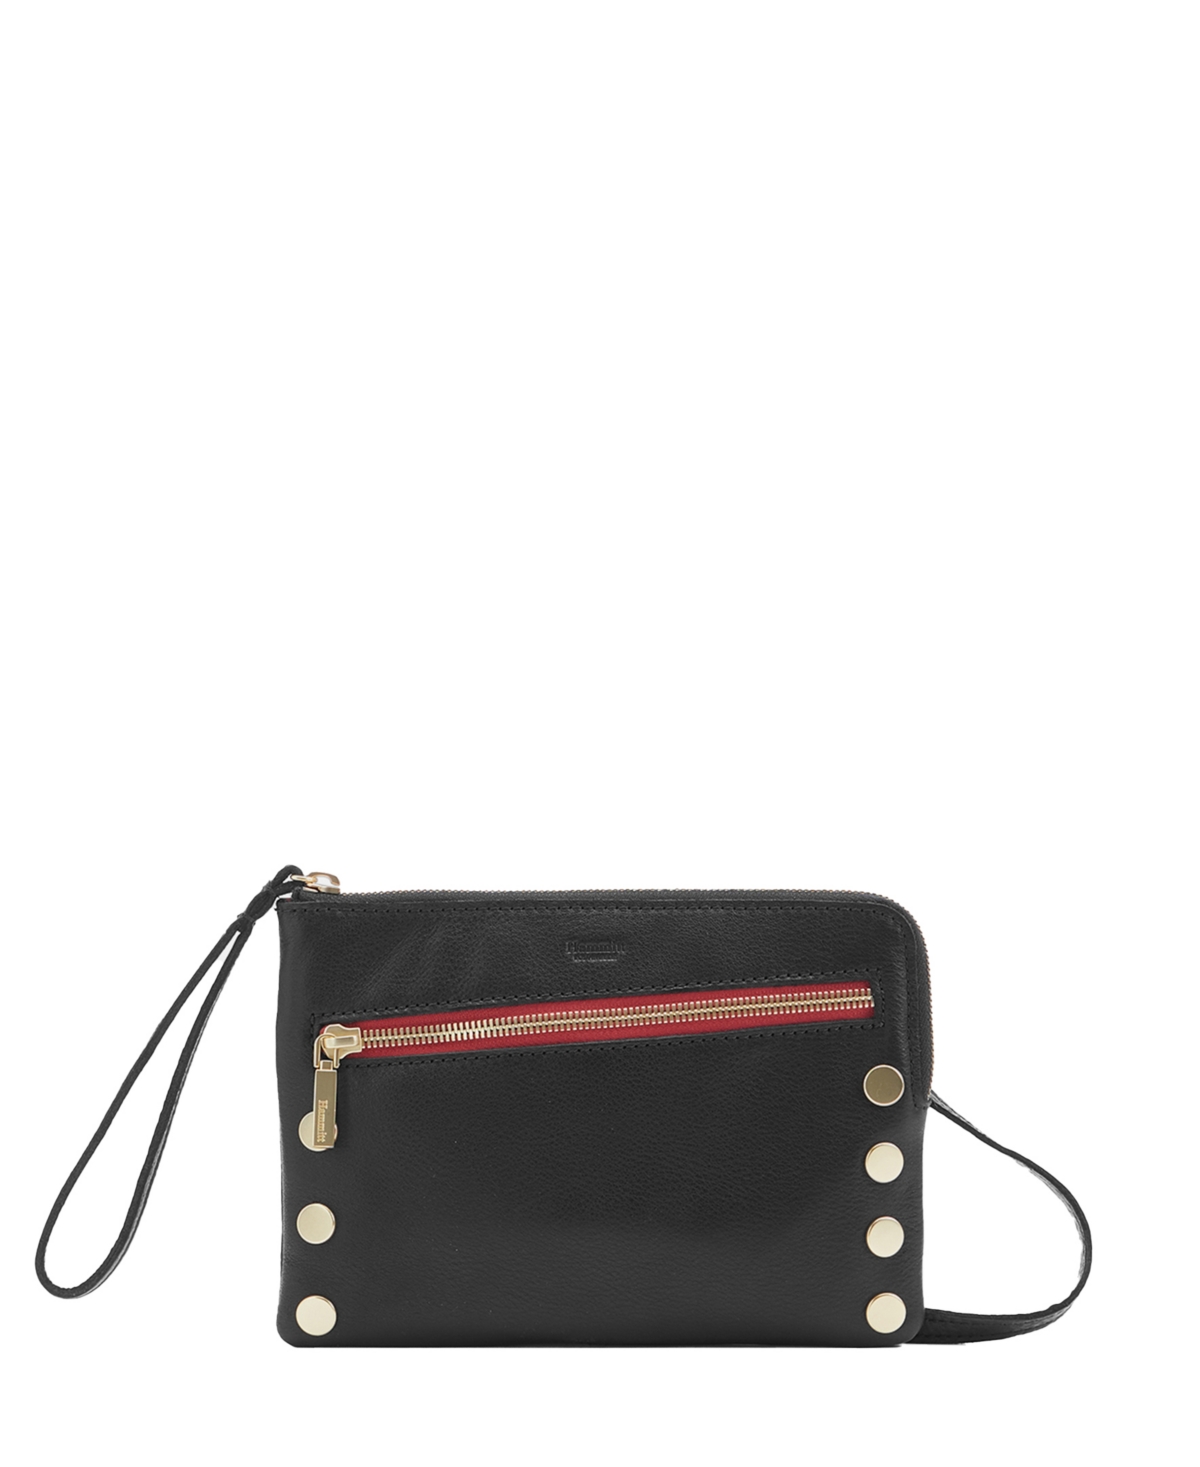 Hammitt Nash Small Leather Crossbody Wristlet In Black Brushed Gold Red Zip